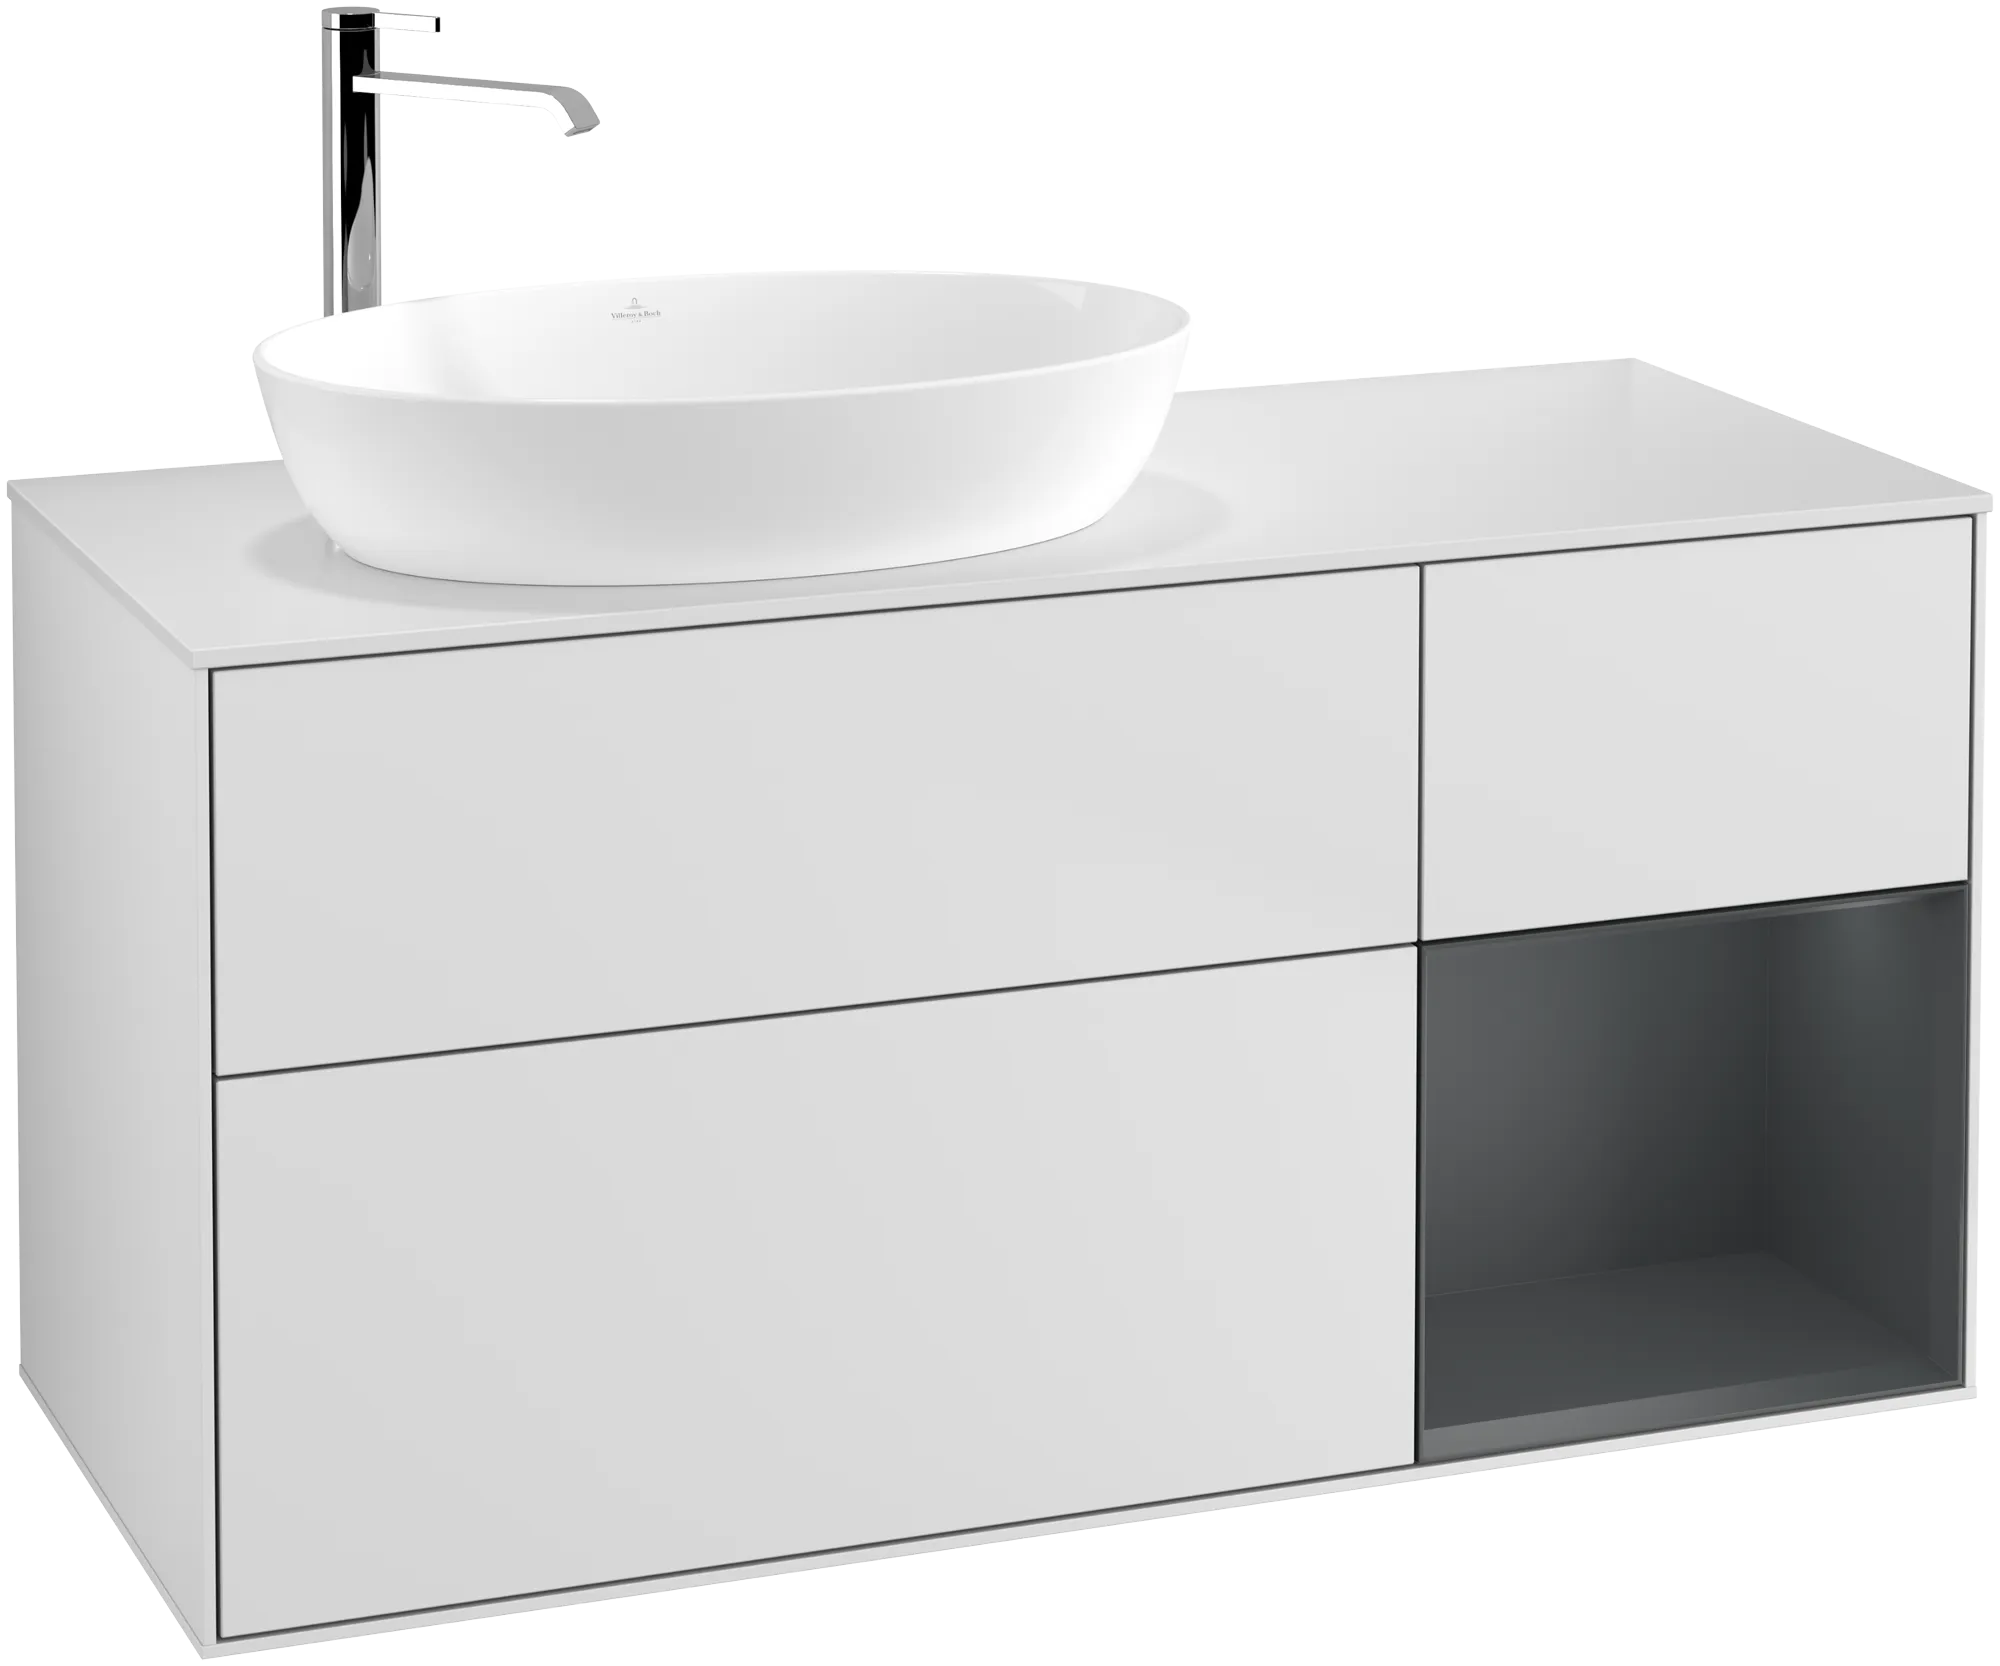 Obrázek VILLEROY BOCH Finion Vanity unit, with lighting, 3 pull-out compartments, 1200 x 603 x 501 mm, White Matt Lacquer / Midnight Blue Matt Lacquer / Glass White Matt #G931HGMT